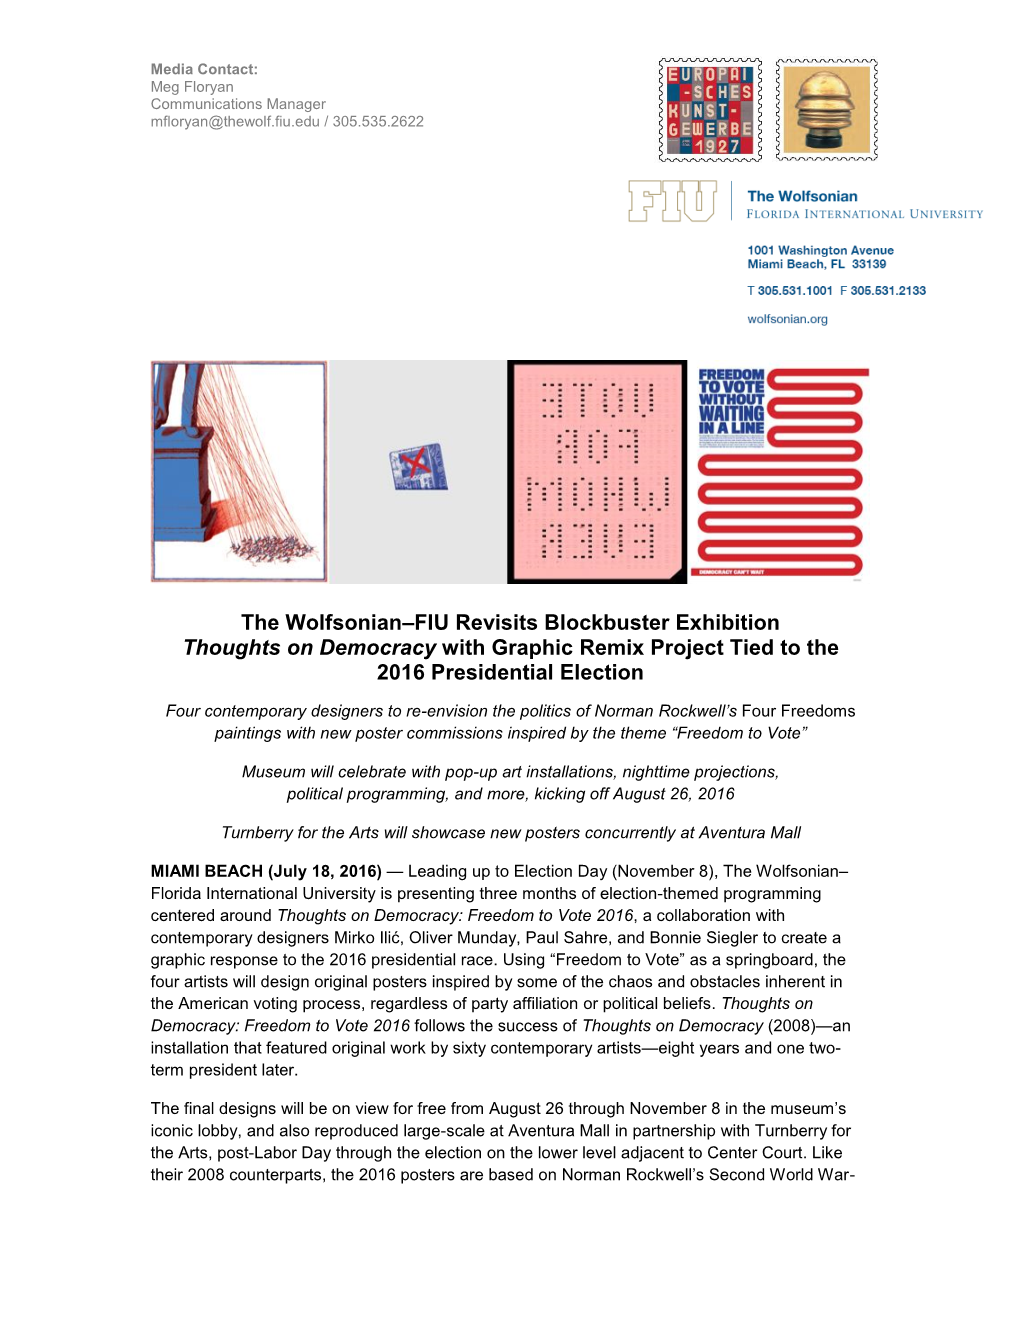 The Wolfsonian–FIU Revisits Blockbuster Exhibition Thoughts on Democracy with Graphic Remix Project Tied to the 2016 Presidential Election